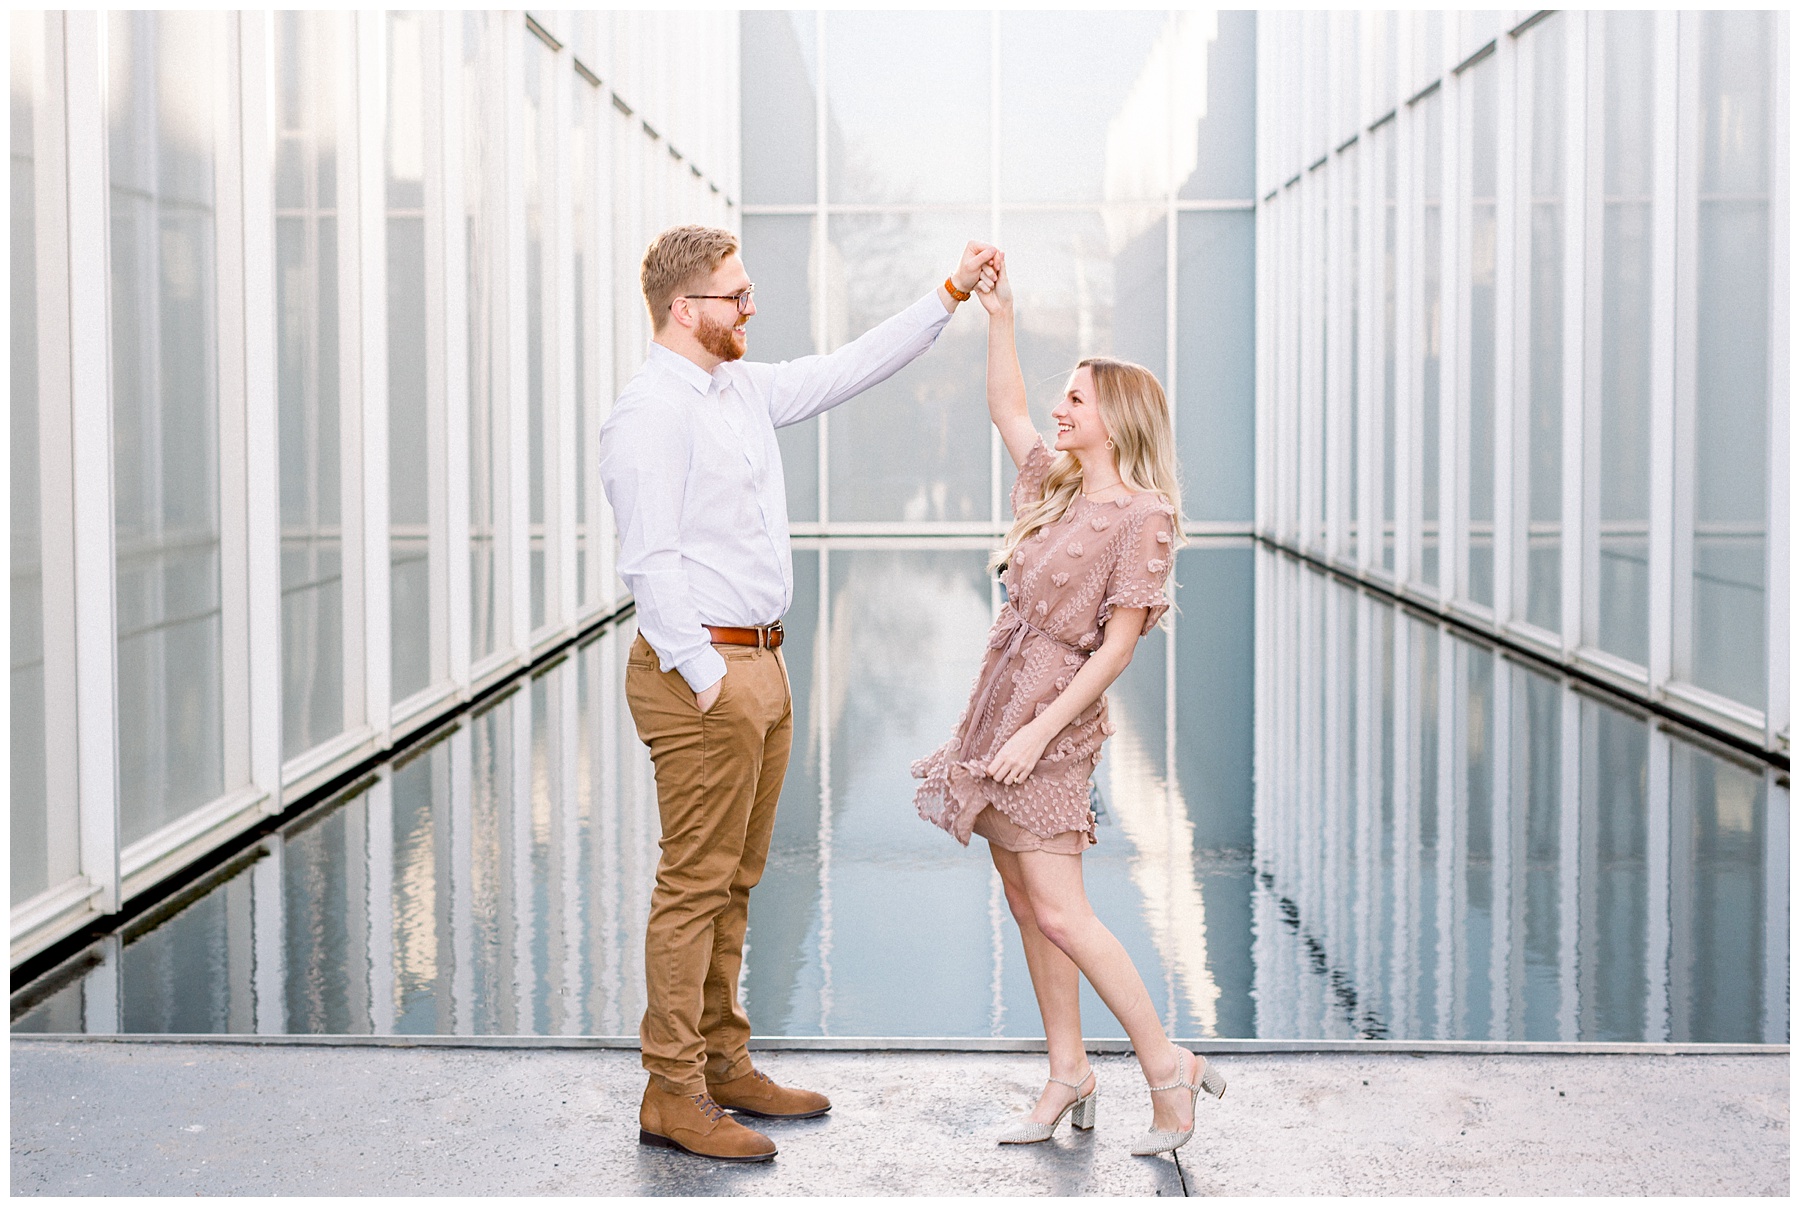 Twirling at North Carolina Museum of Art Spring Engagement Session in Raleigh North Carolina